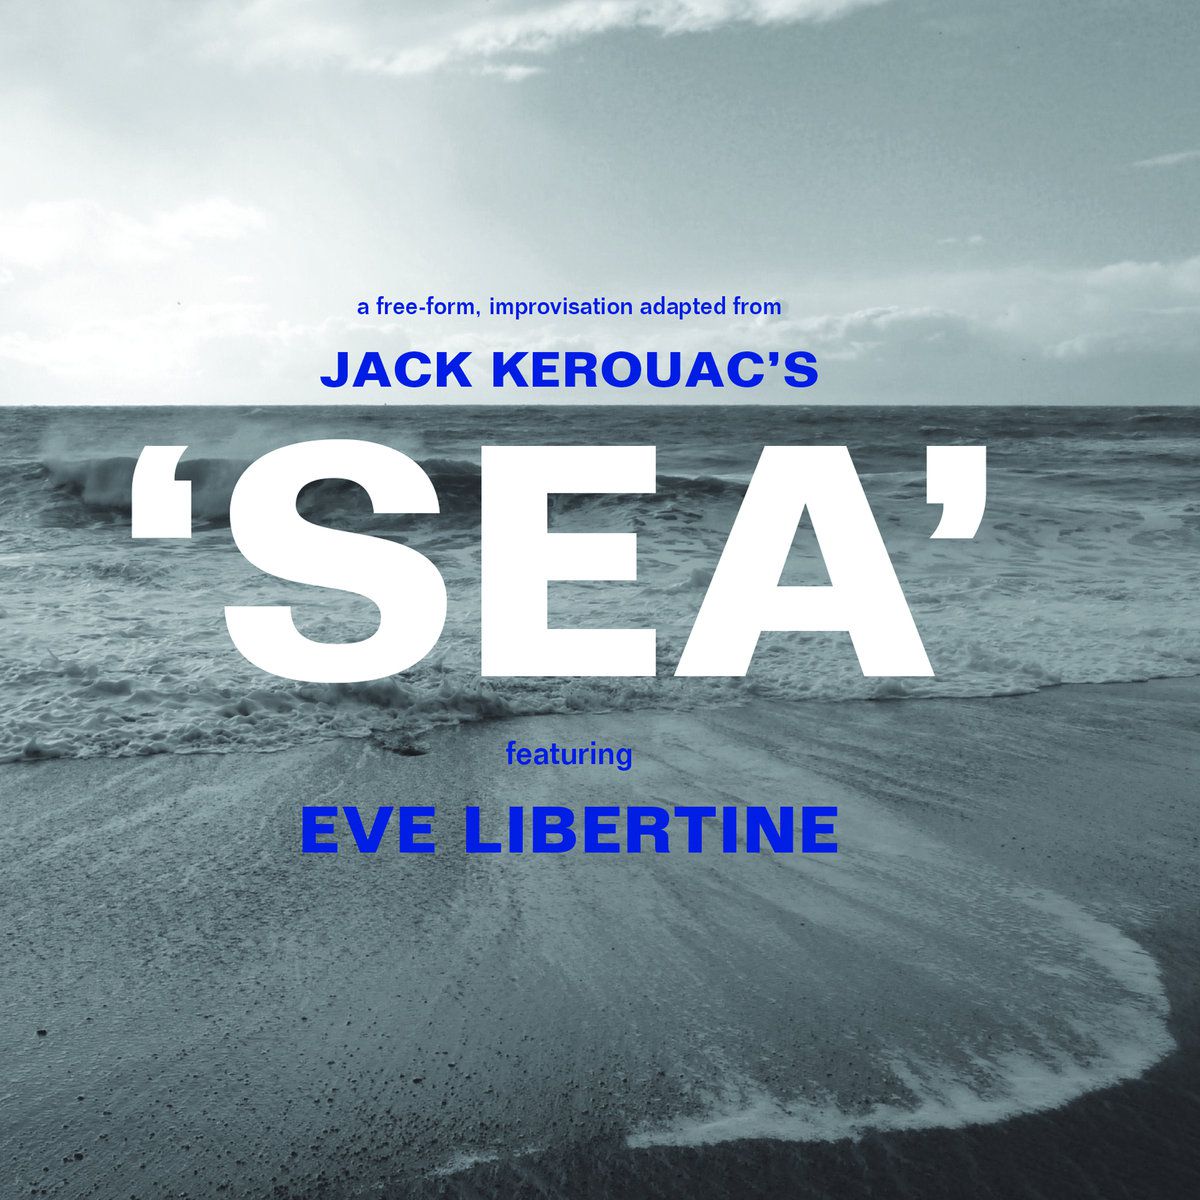 A Free-Form, Improvisation Adapted From Jack Kerouac’s ’Sea’